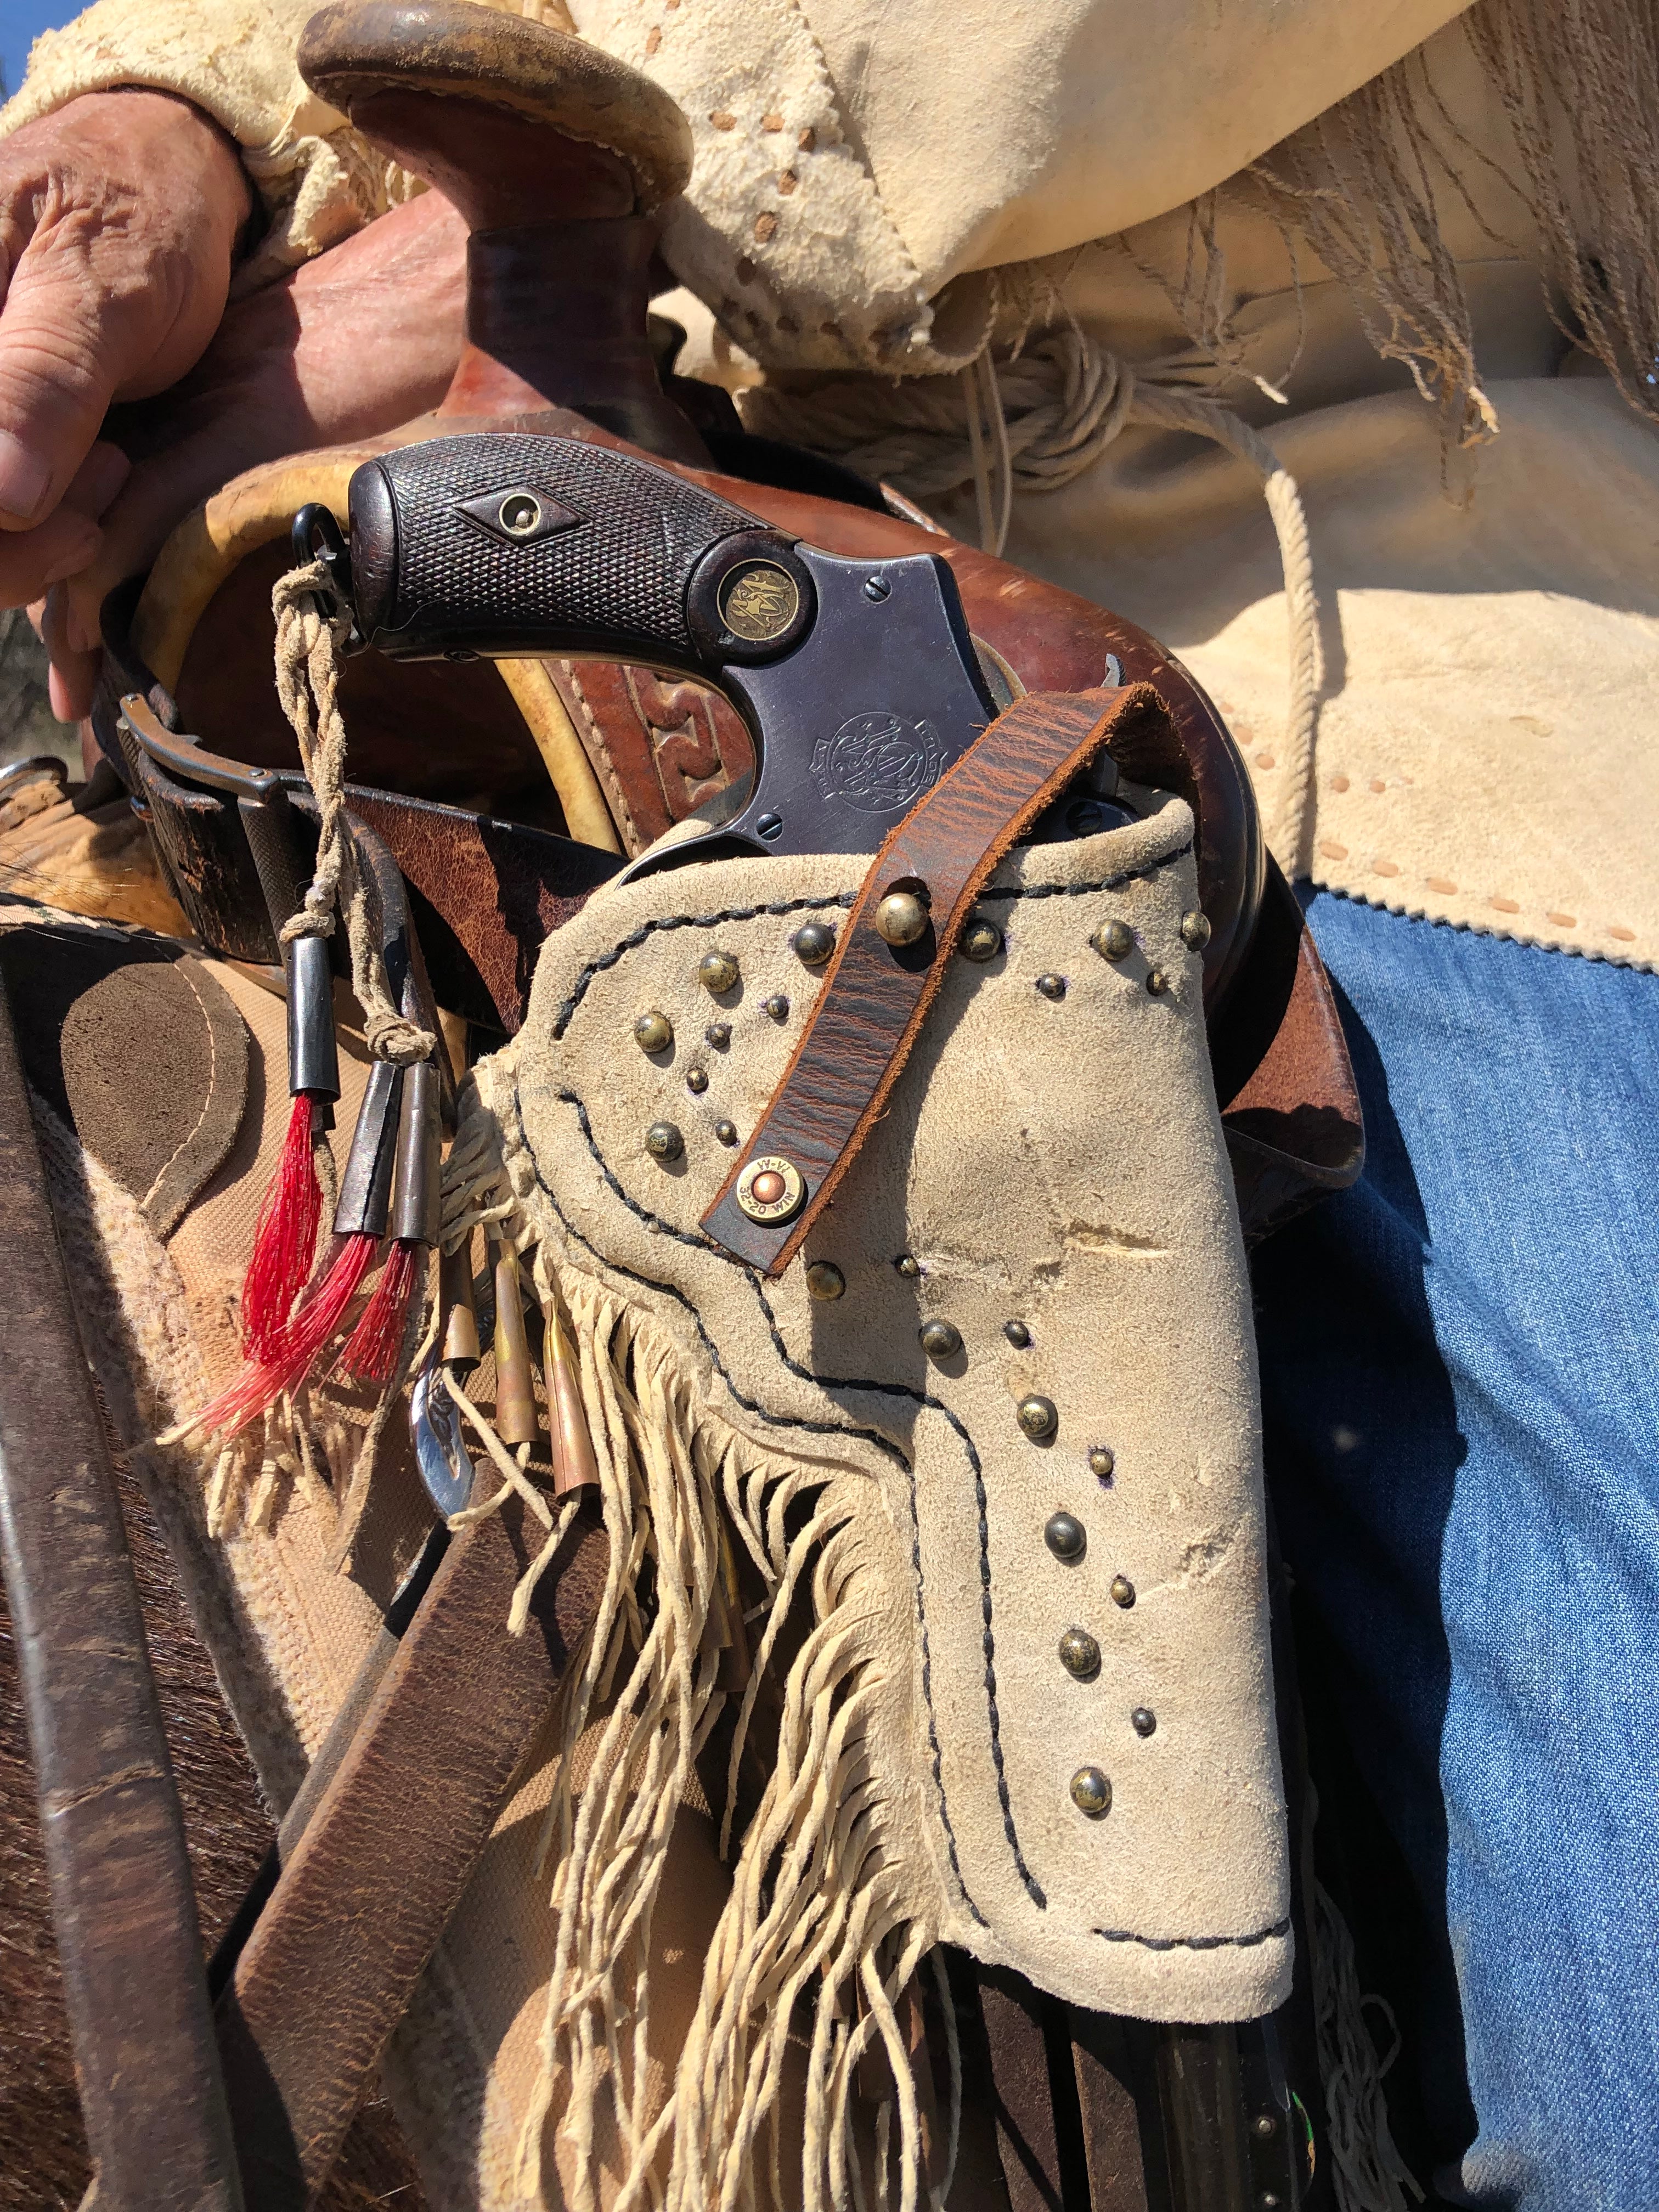 100 year old Smith & Wesson full rig - chambered 32-20 Win ... with a fantastic story!